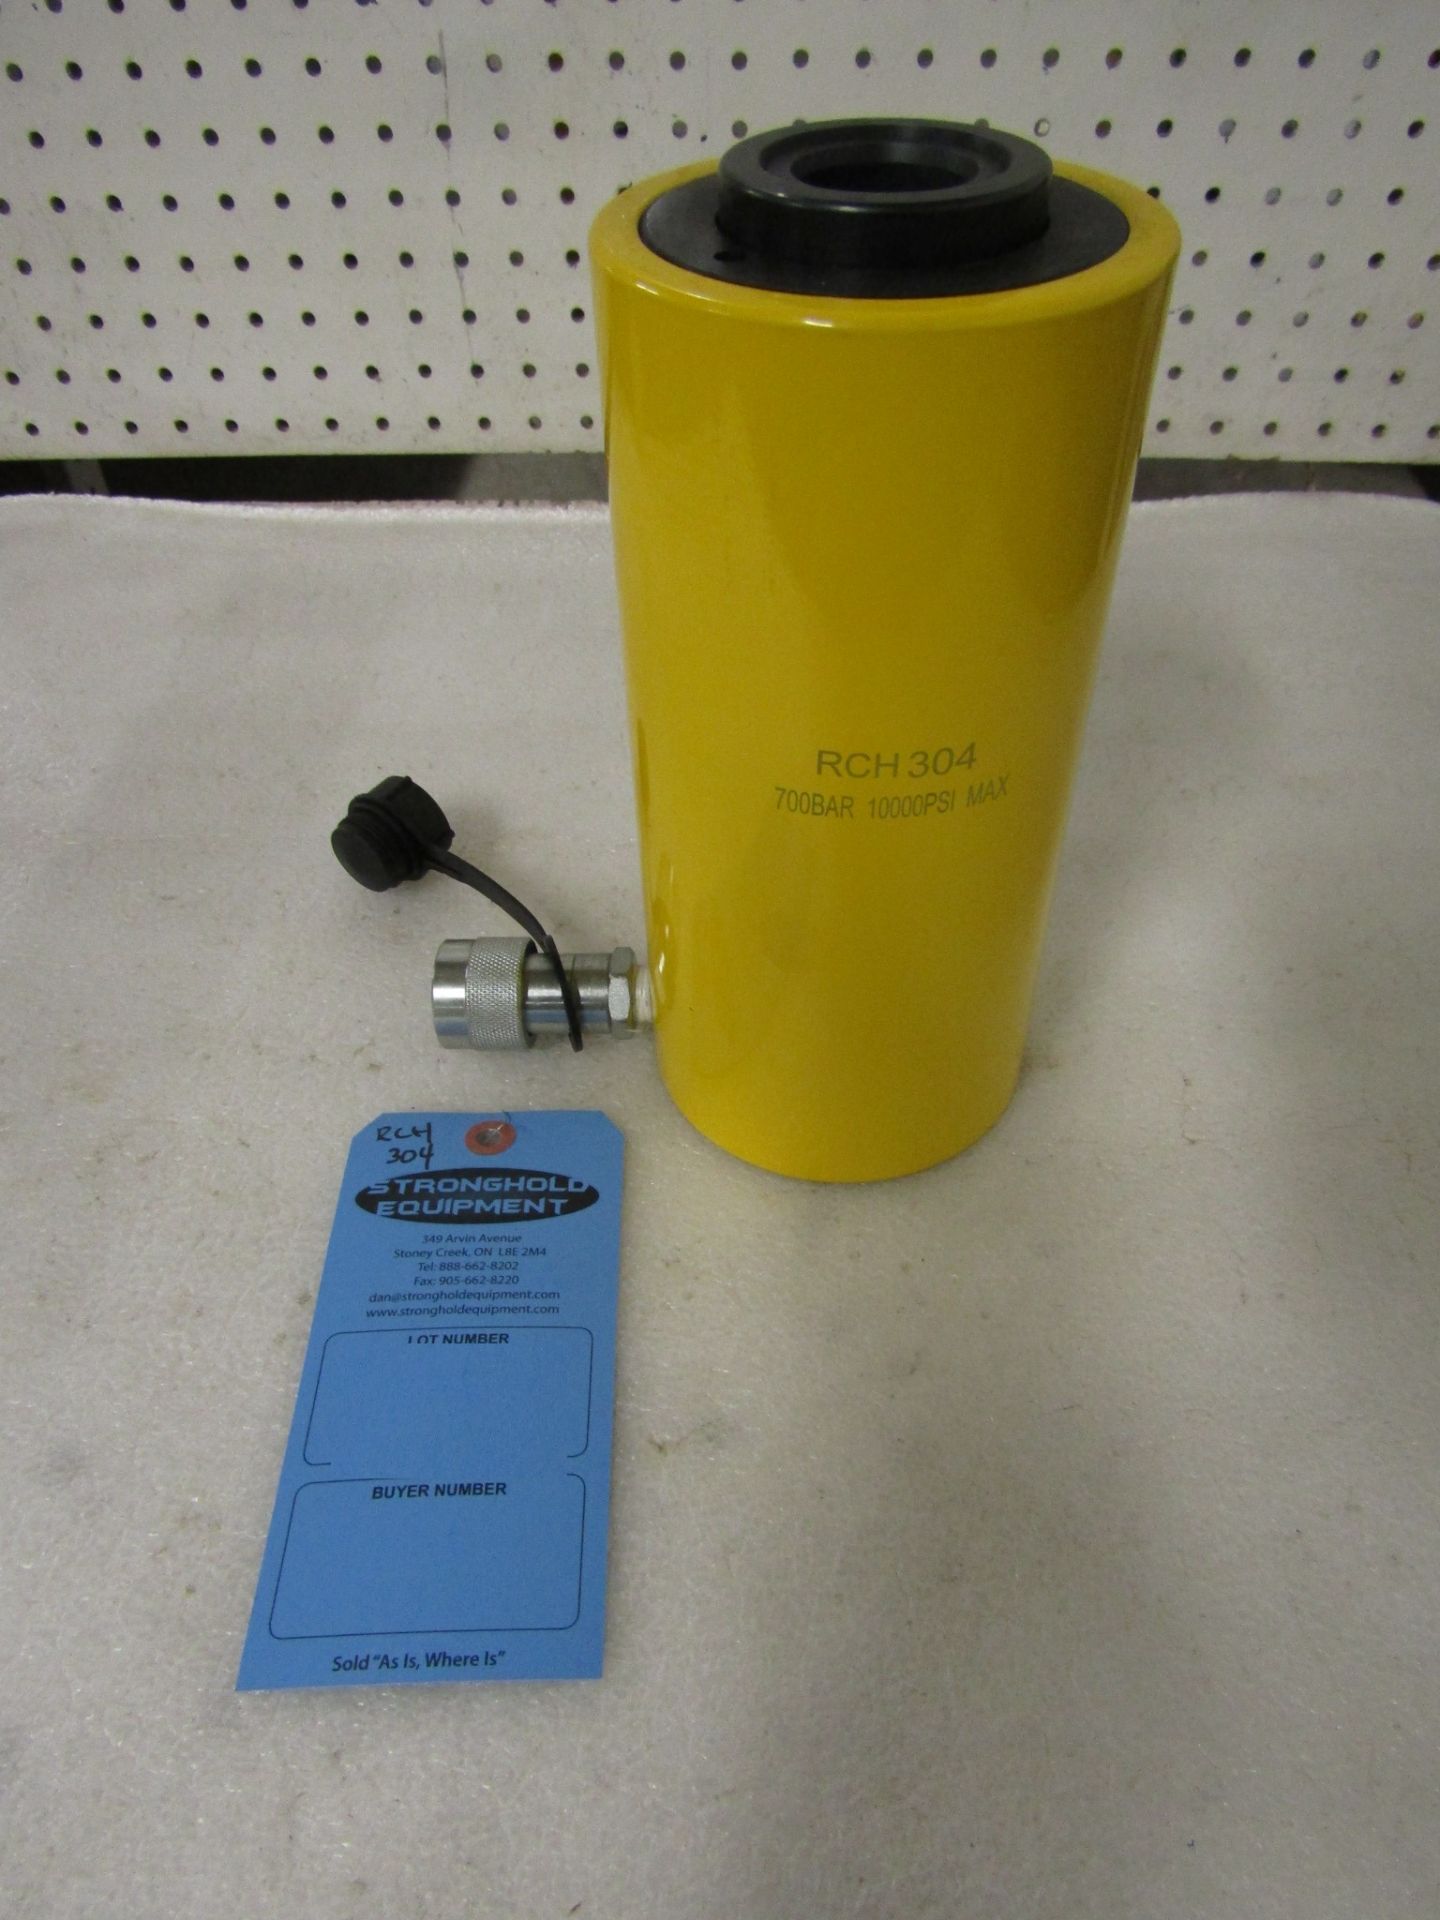 RCH-304 MINT Hole Jack - 30 ton Hollow Hydraulic Jack with 4" stroke - hole through type cylinder